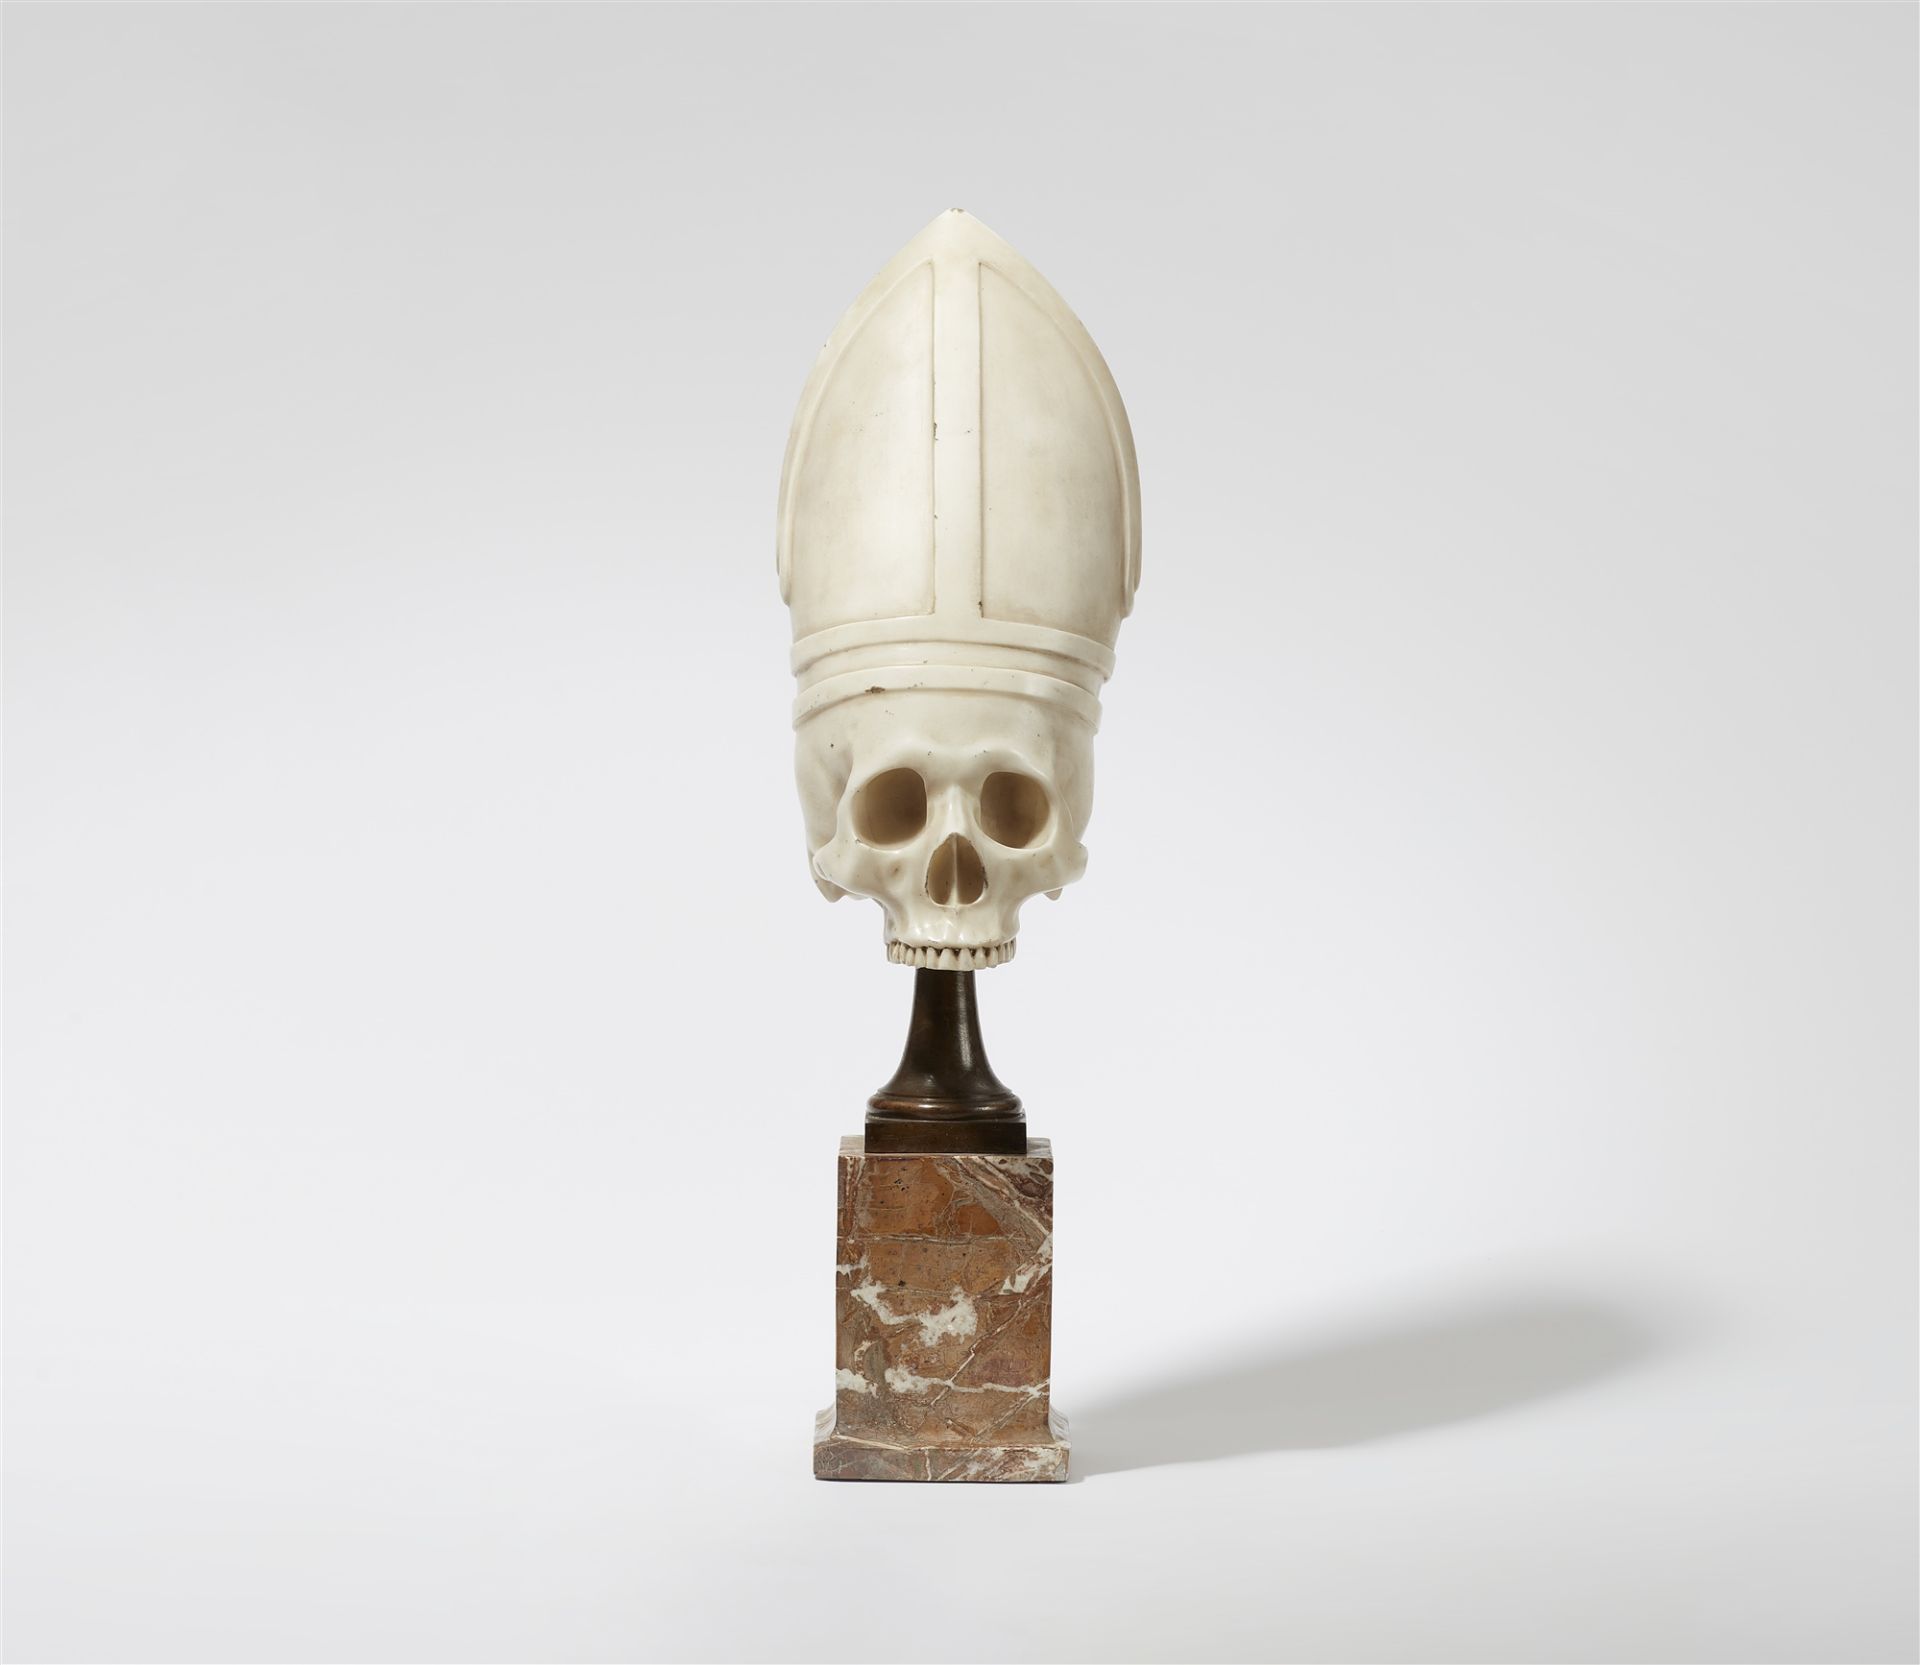 A white marble skull wearing a mitre